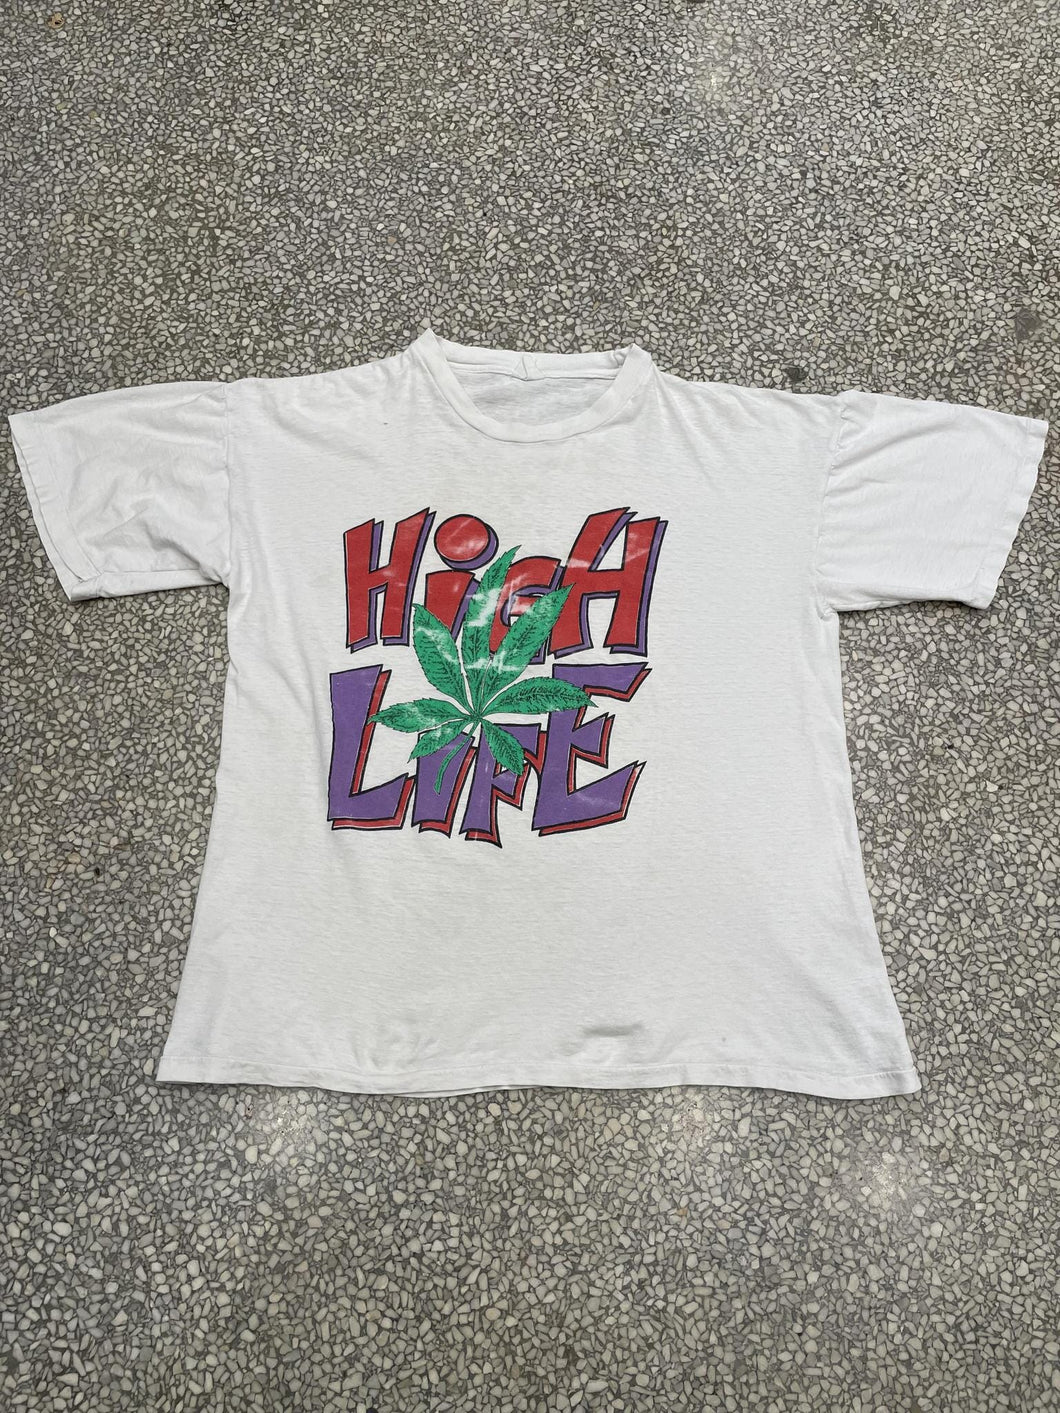 High Life Vintage 90s Faded White ABC Vintage 